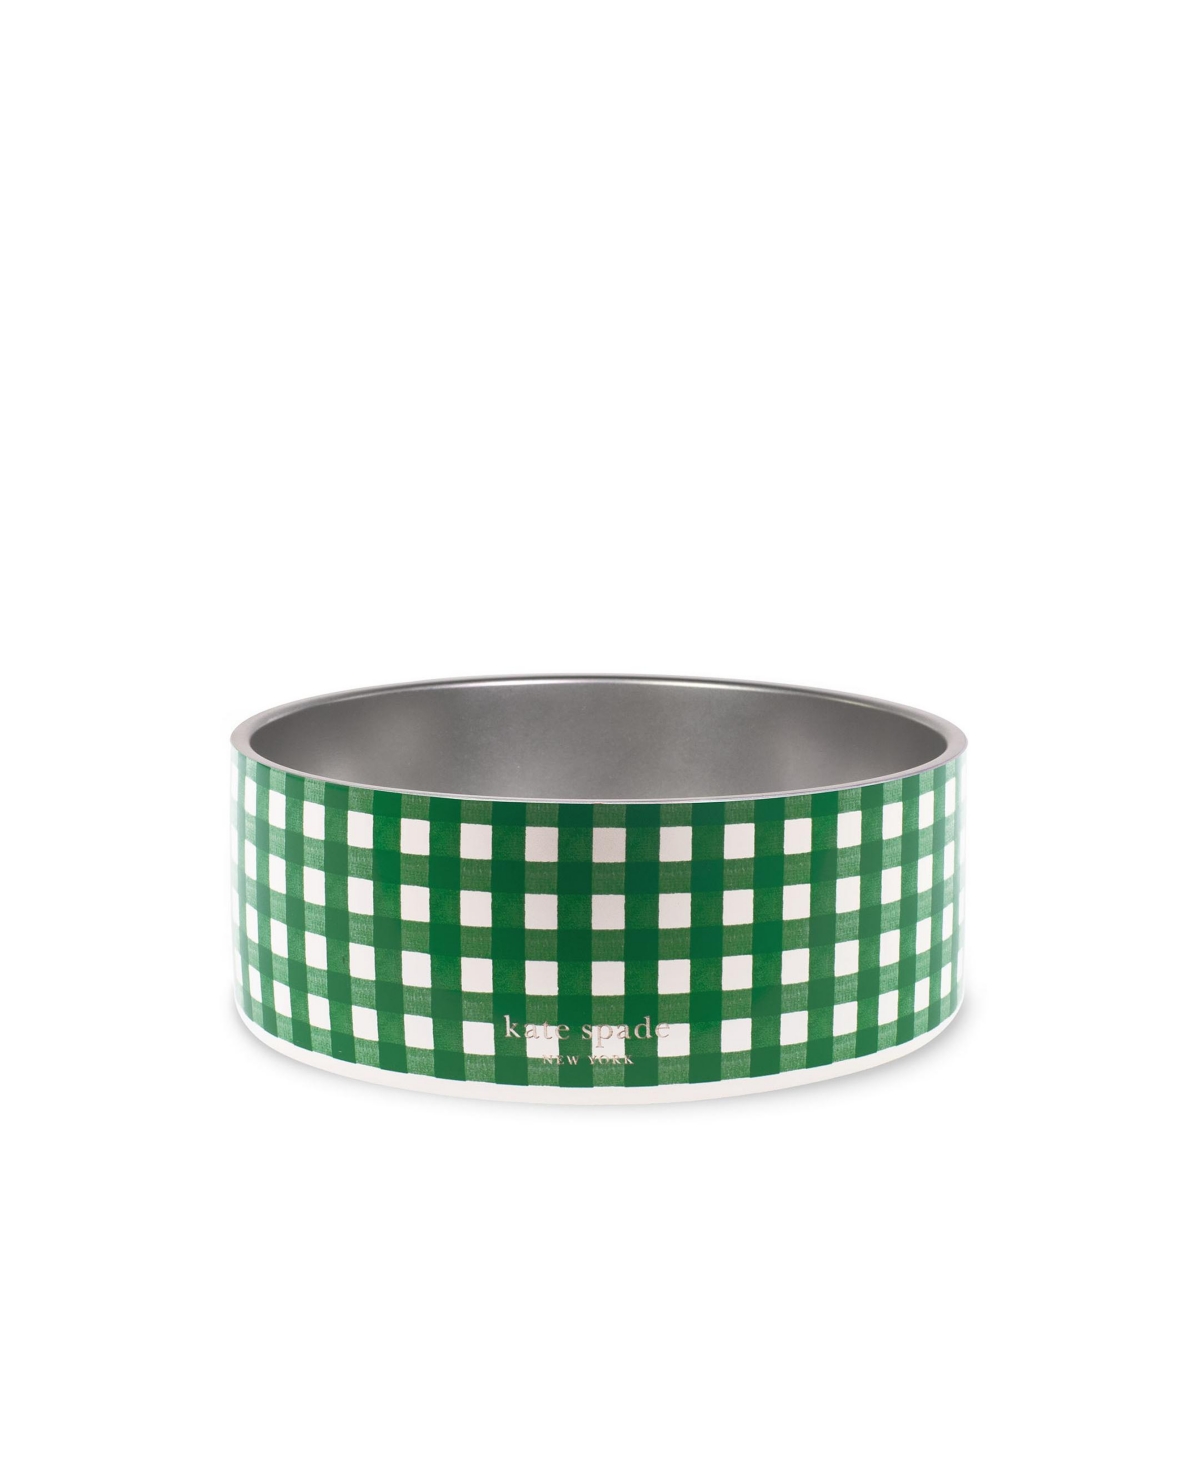 Small Dog Bowl - Green Gingham